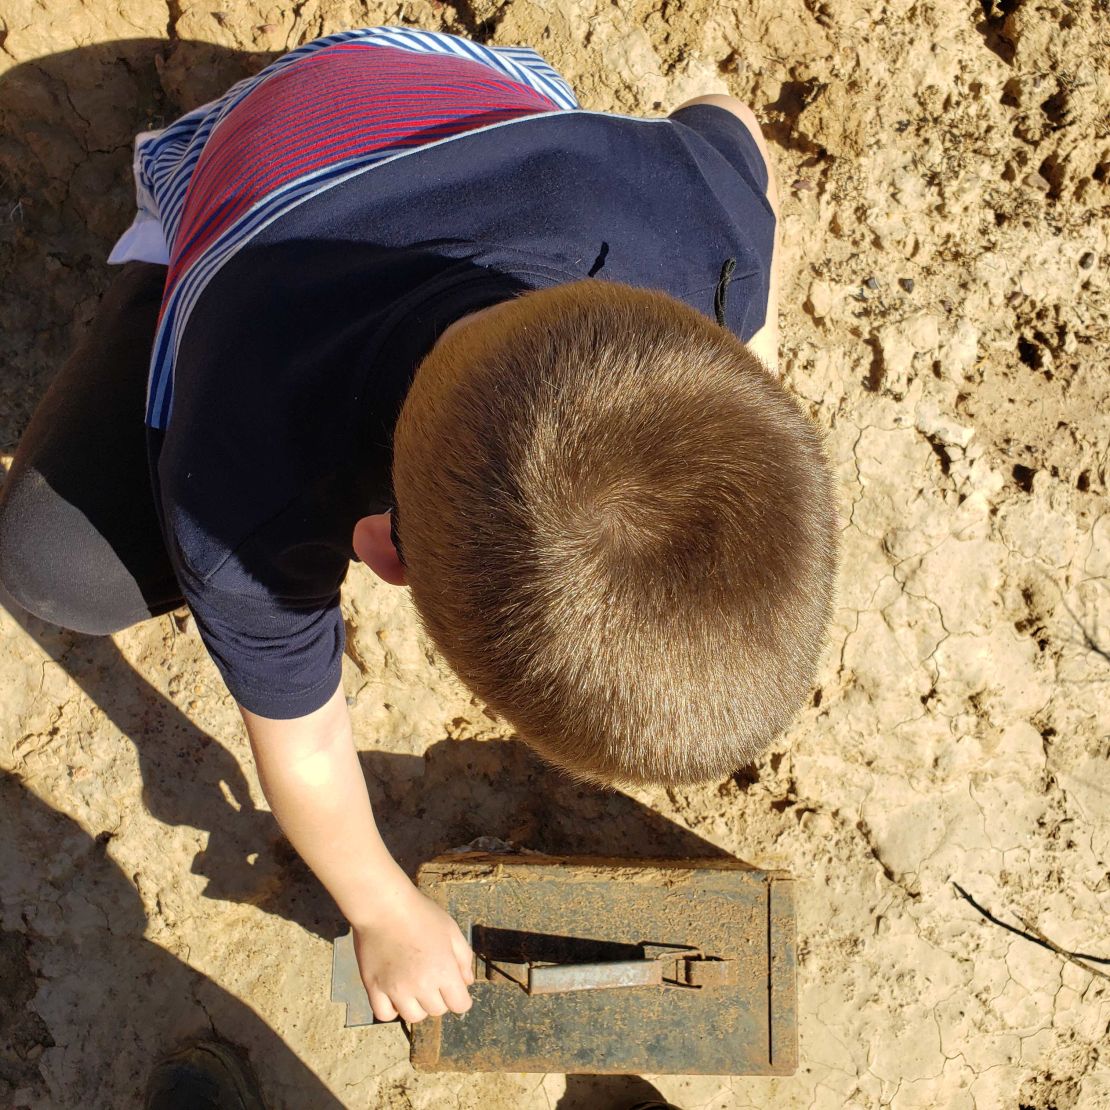 Dan DeJager's older son Hunter, 8, investigates a geocache the family found recently.